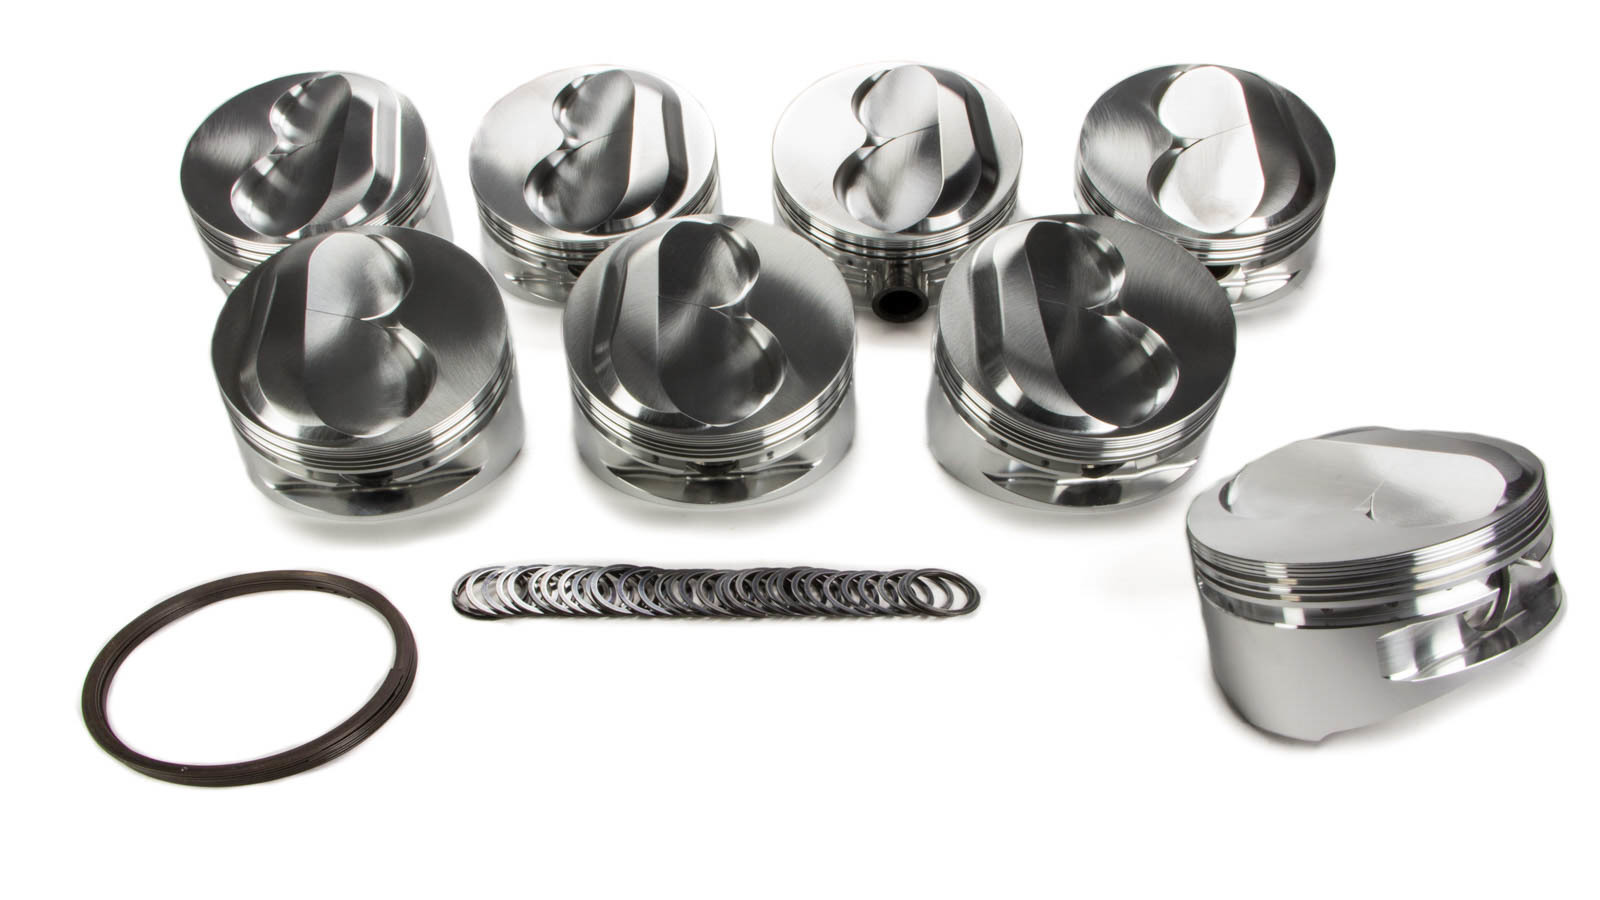 JE Pistons 207514 Piston, Small Block Dome, Forged, 4.185 in Bore, 1/16 x 1/16 x 3/16 in Ring Grooves, Plus 10.80 cc, Small Block Chevy, Set of 8